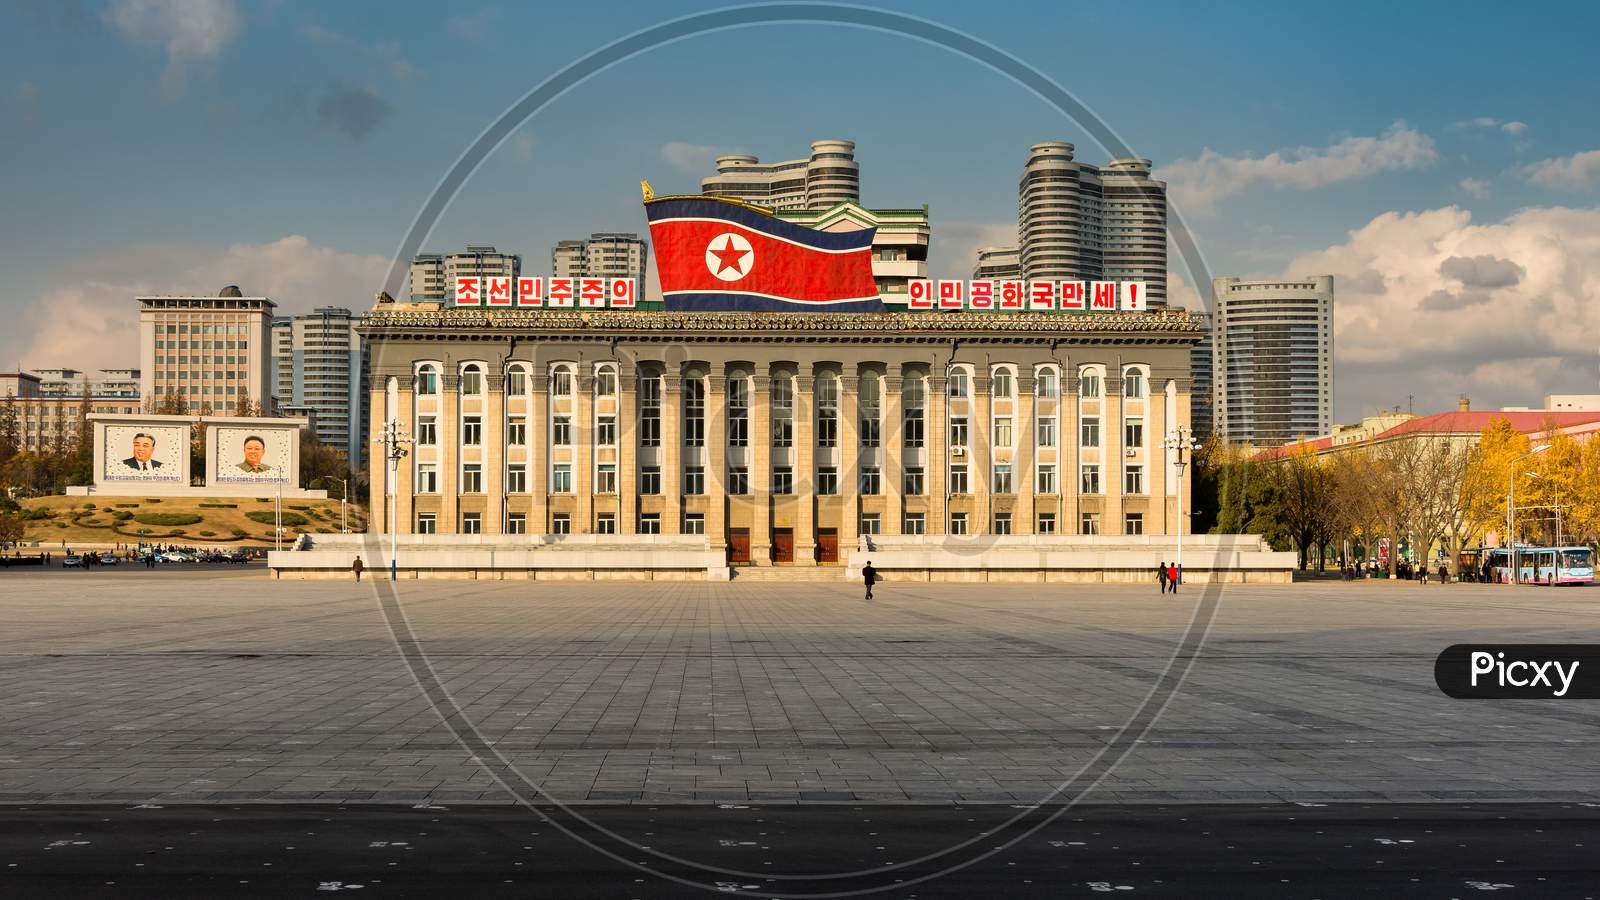 Kim Il-Sung Square And Government Building Decorated With Huge Flag Of North Korea